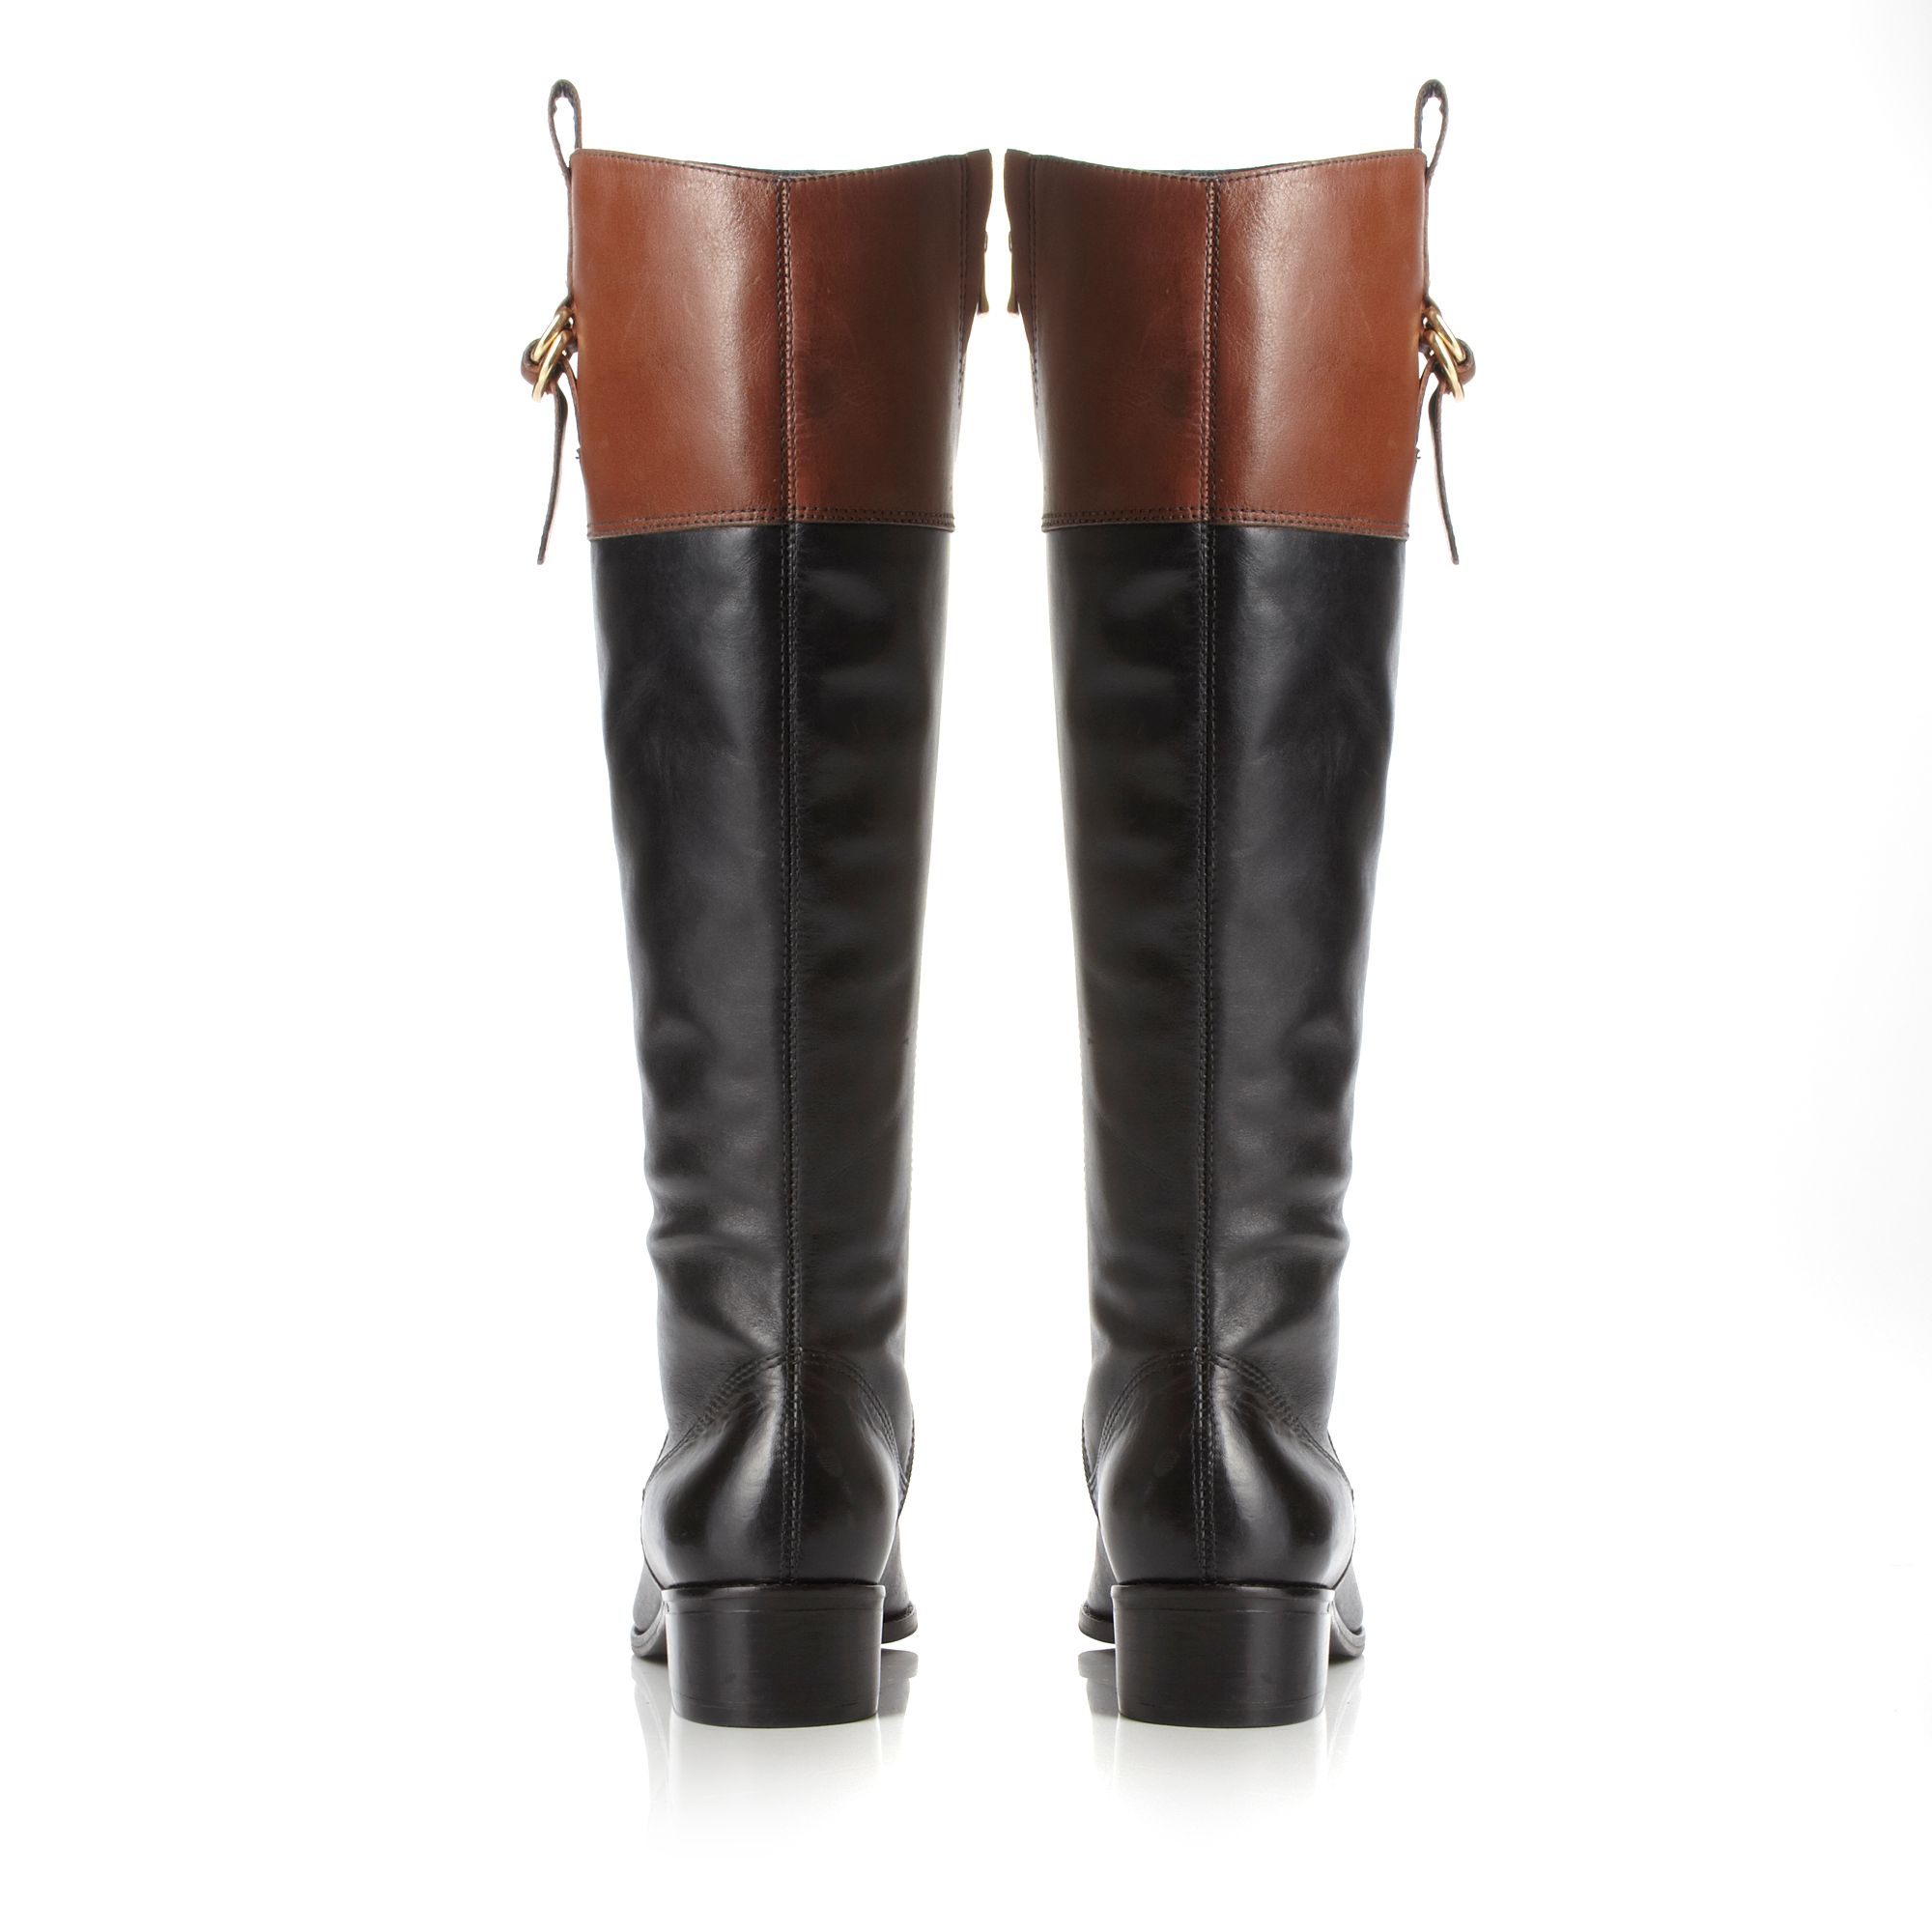 Dune Tilbury Contrast Collar Riding Boots in Brown | Lyst